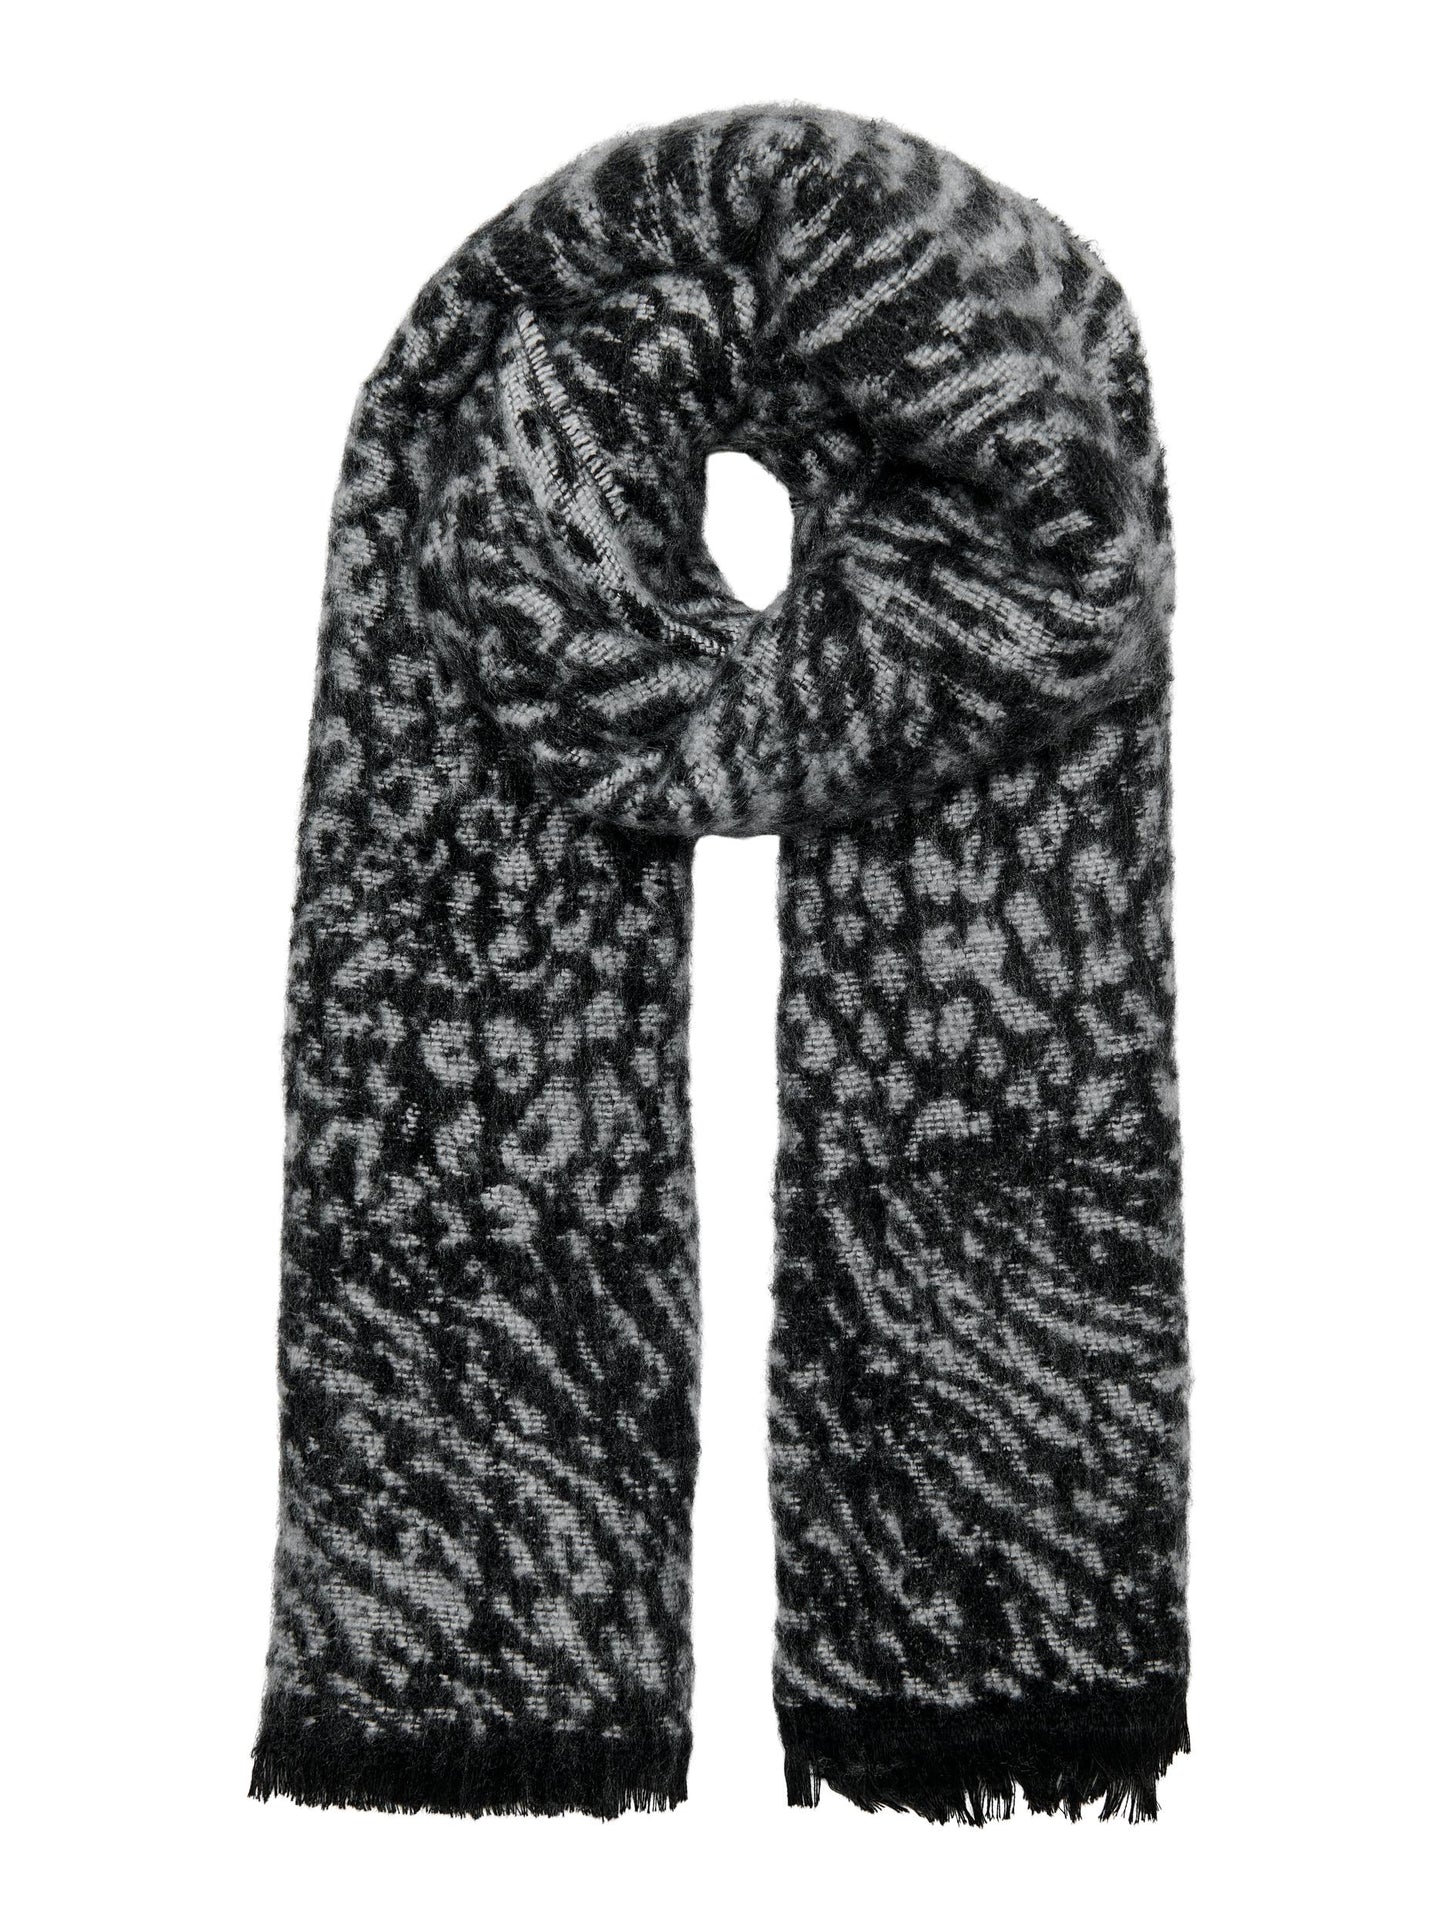 ONLY Trine Animal Print Fluffy Knit Blanket Scarf in Black & Grey - One Nation Clothing